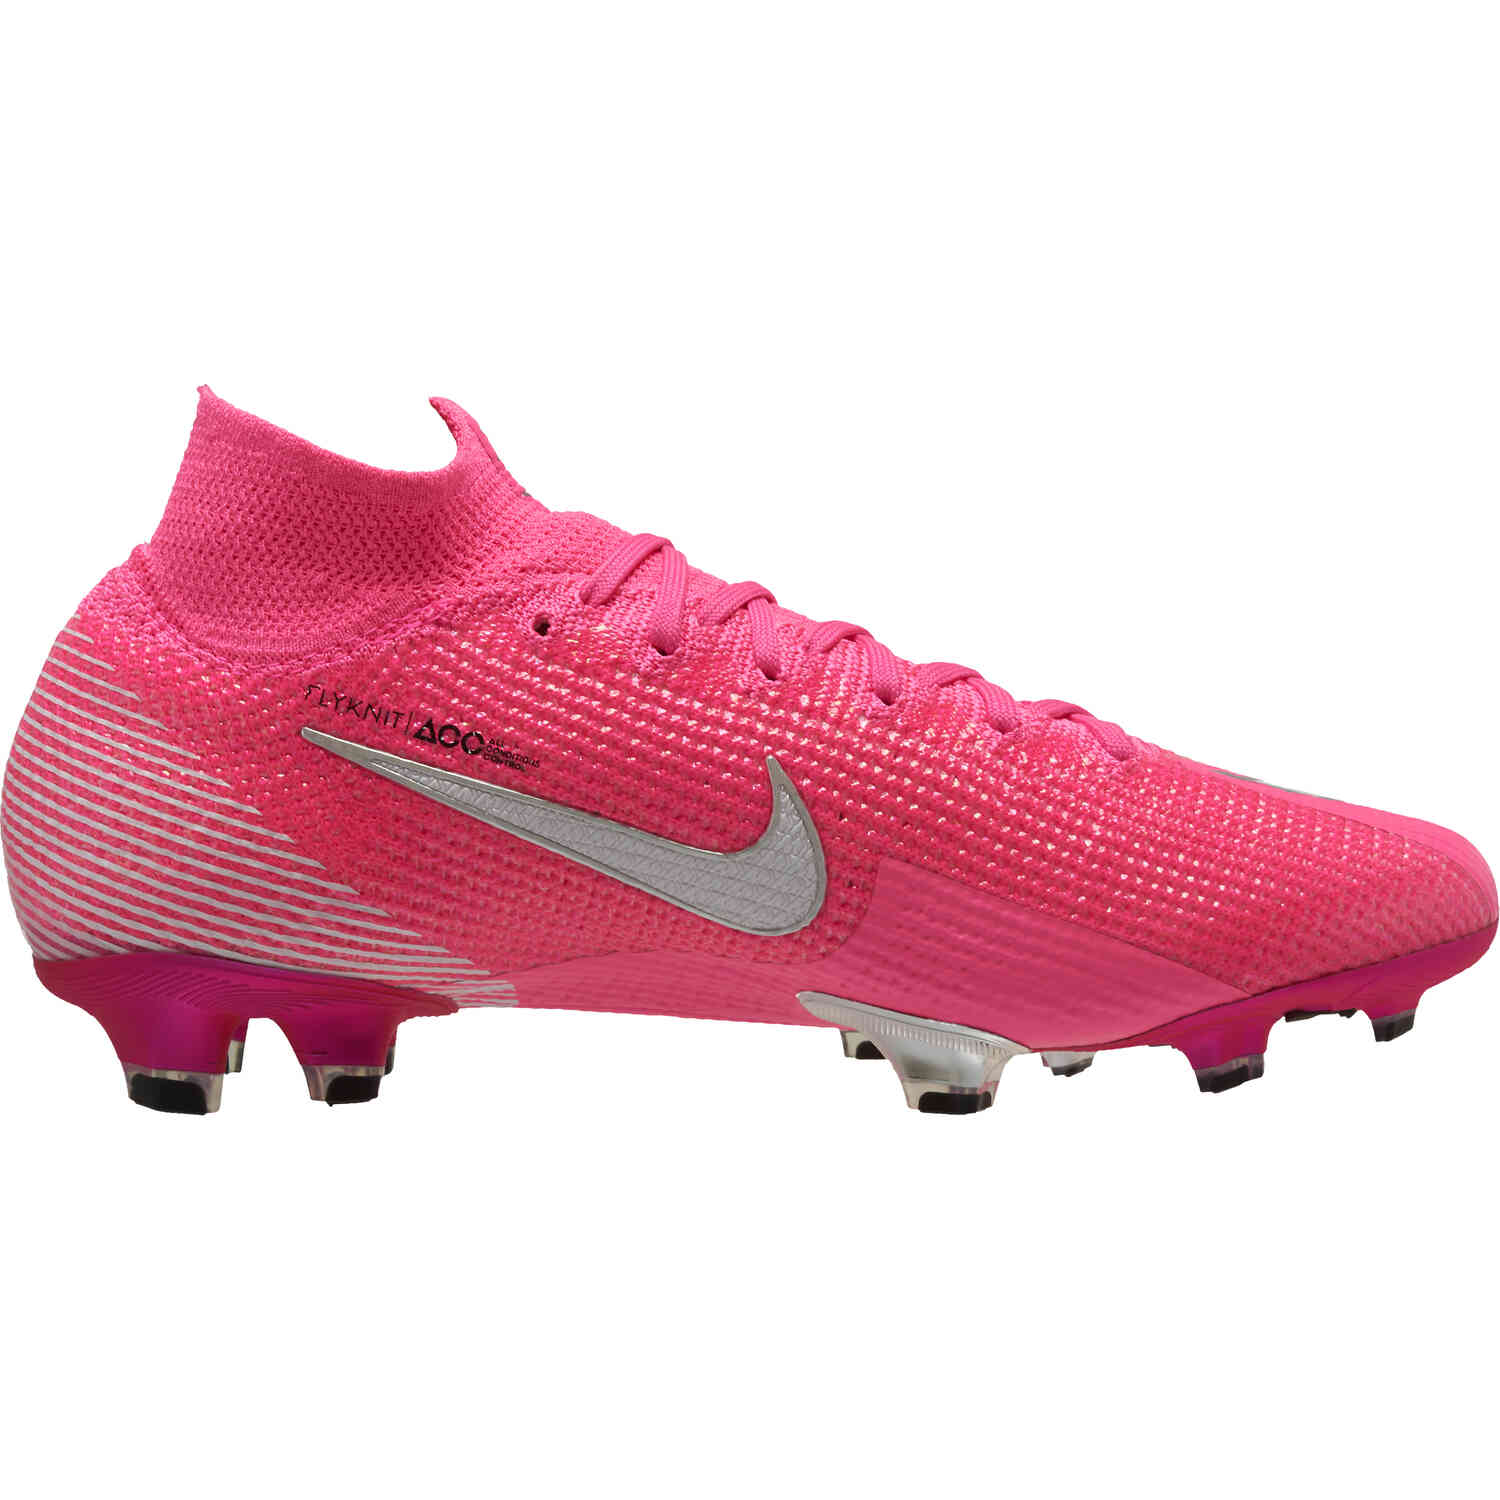 pink nike mercurial soccer cleats